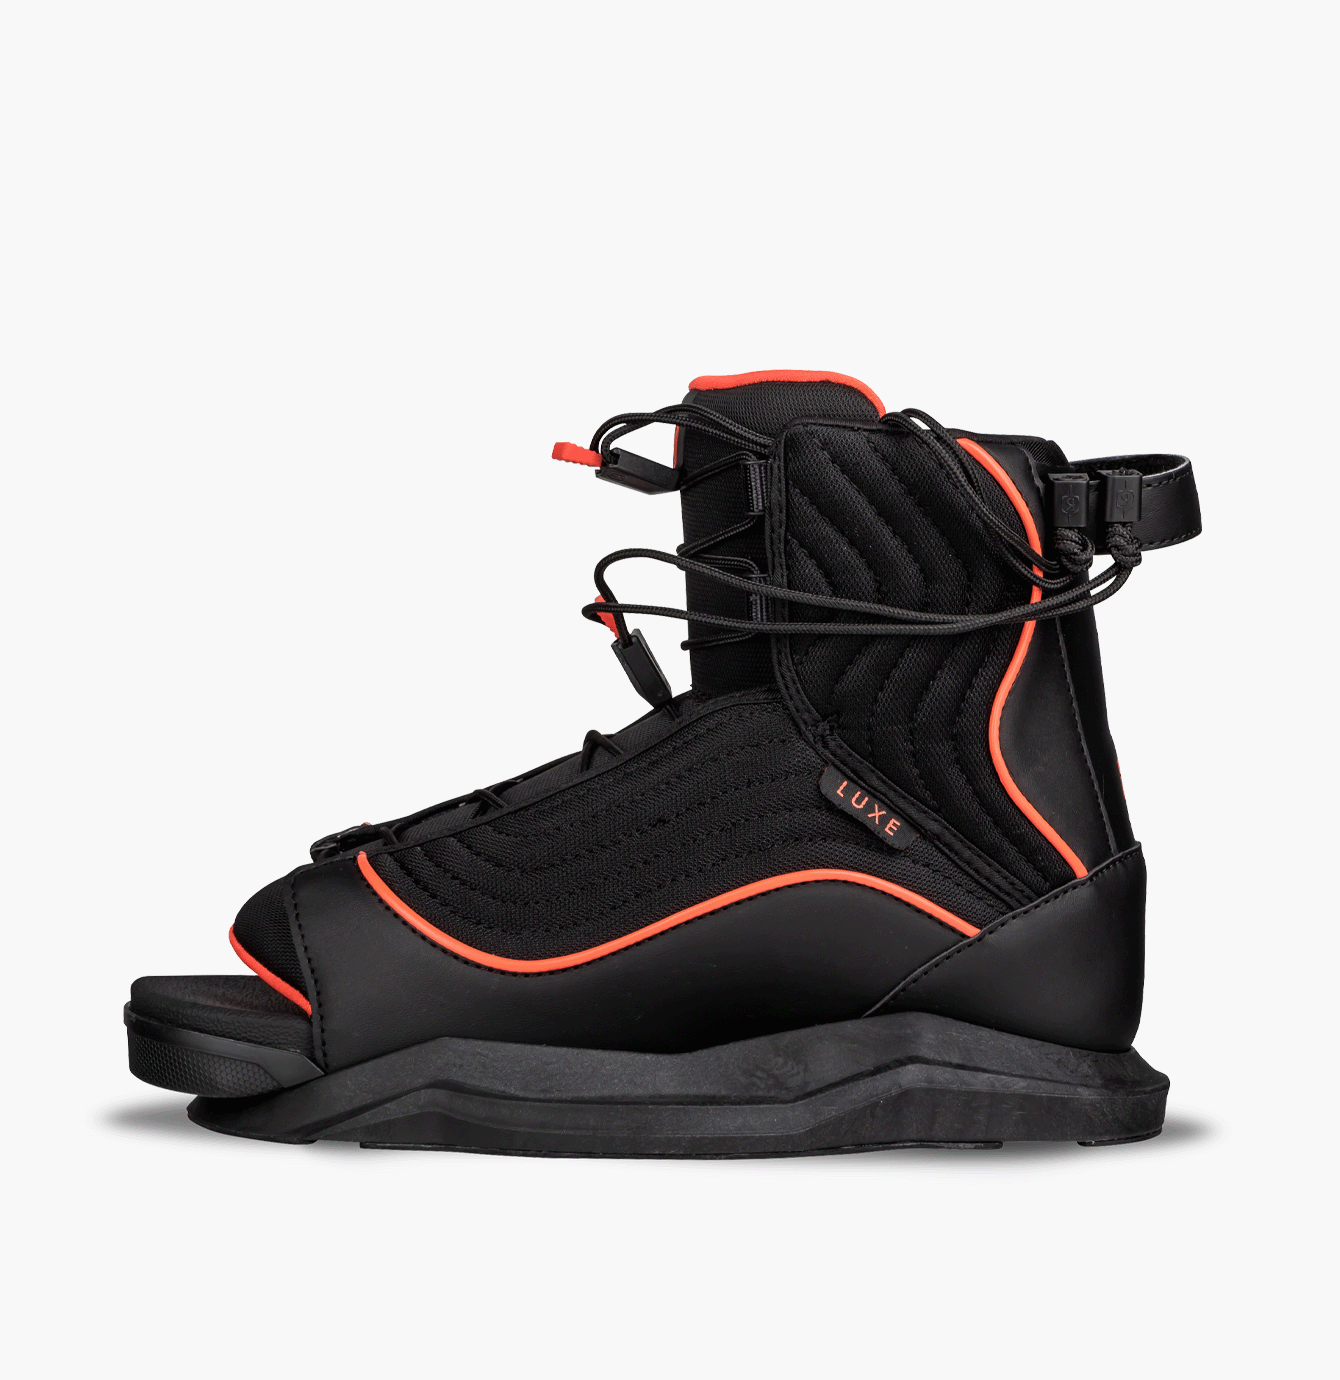 2023 RONIX Women's wakeboard boots Luxe - Stage 1 - Black / Coral